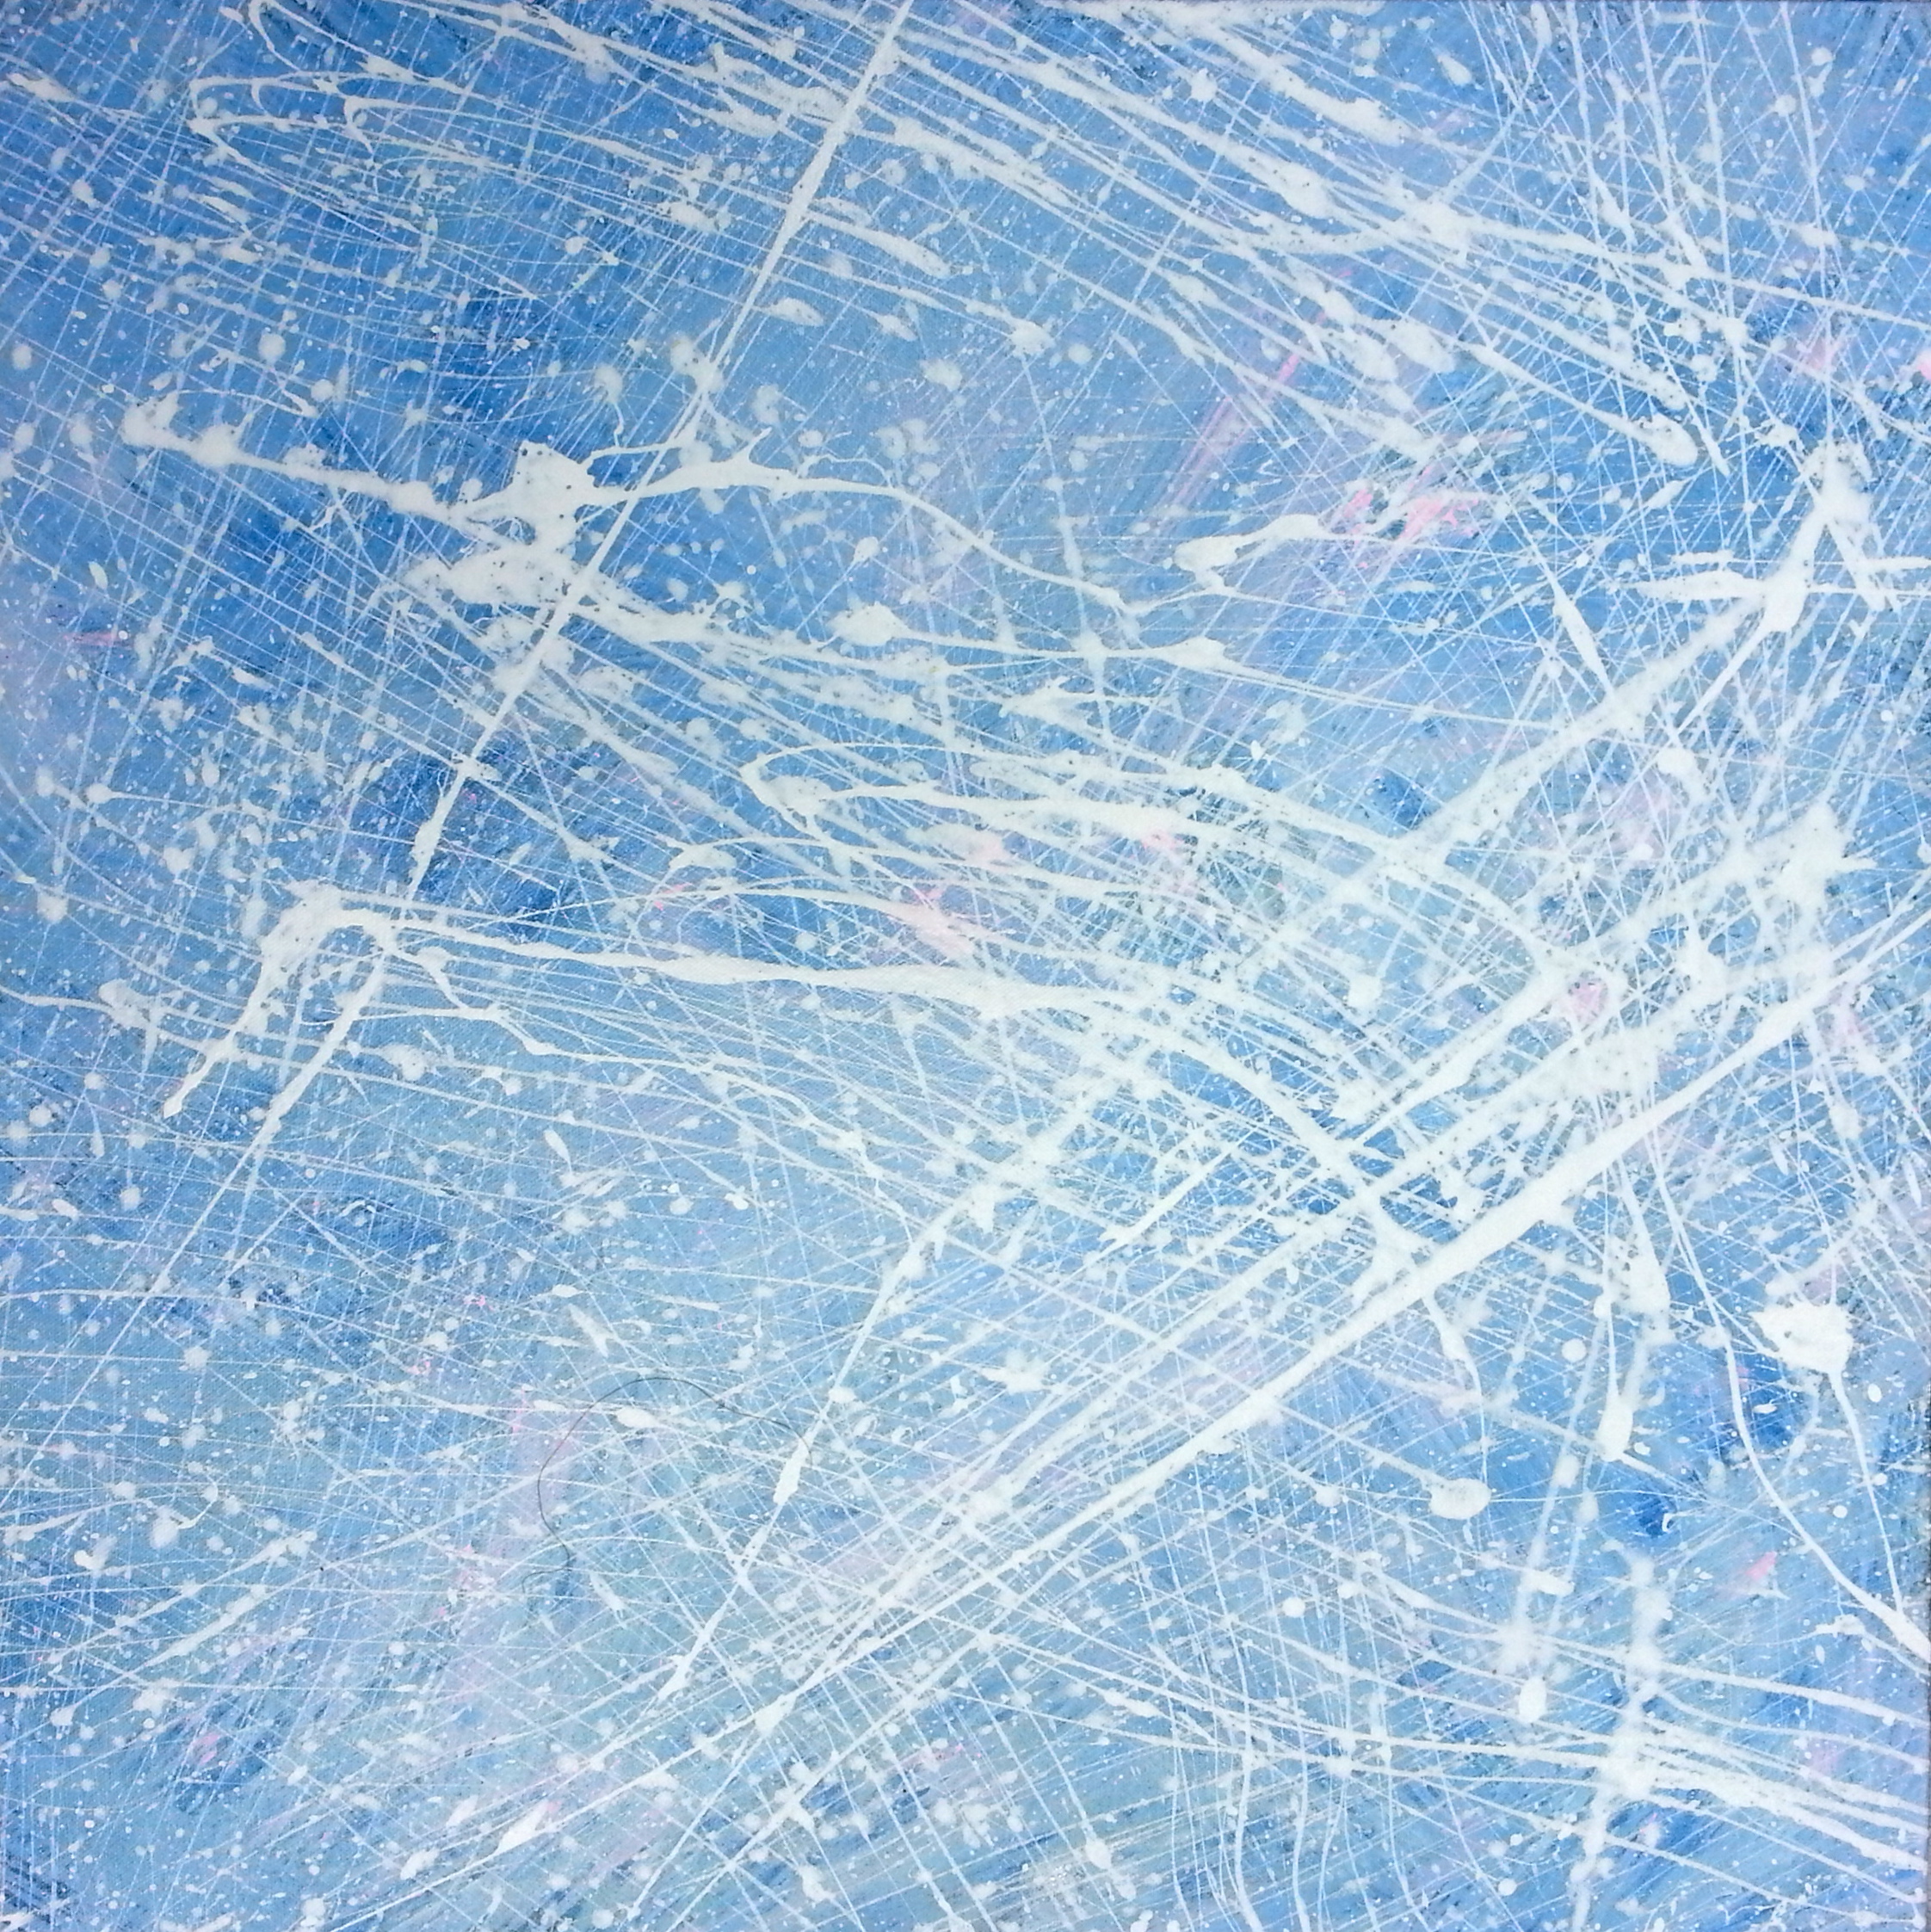  Sky Closeup 4, 2014 One of a series of nine canvases 24 x 24 inches Acrylic on canvas 